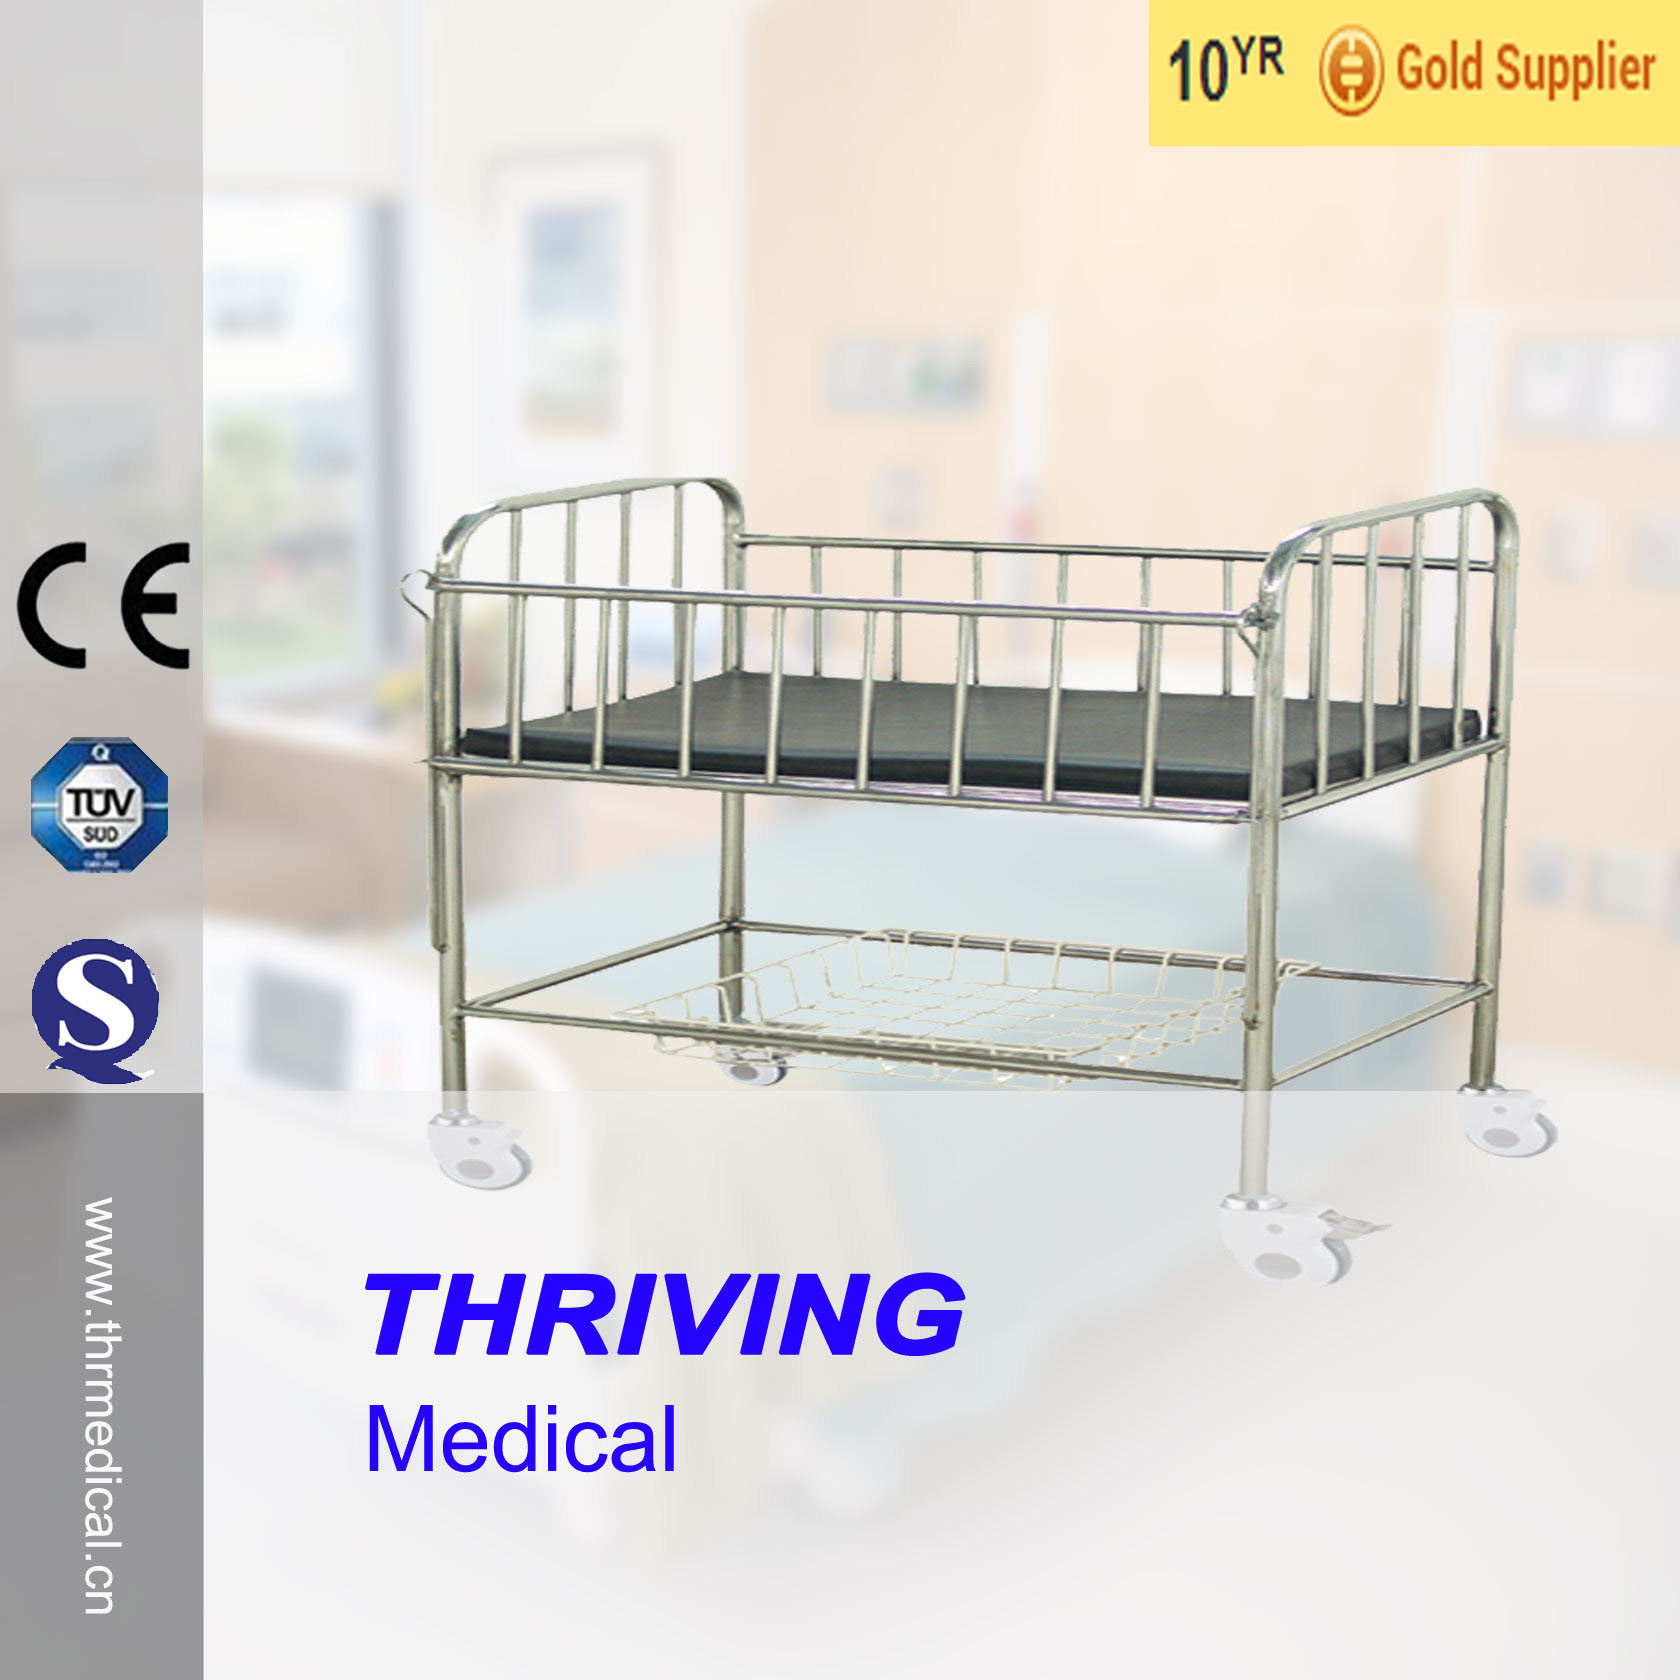 Thr-B17 Stainless Steel Infant Bed